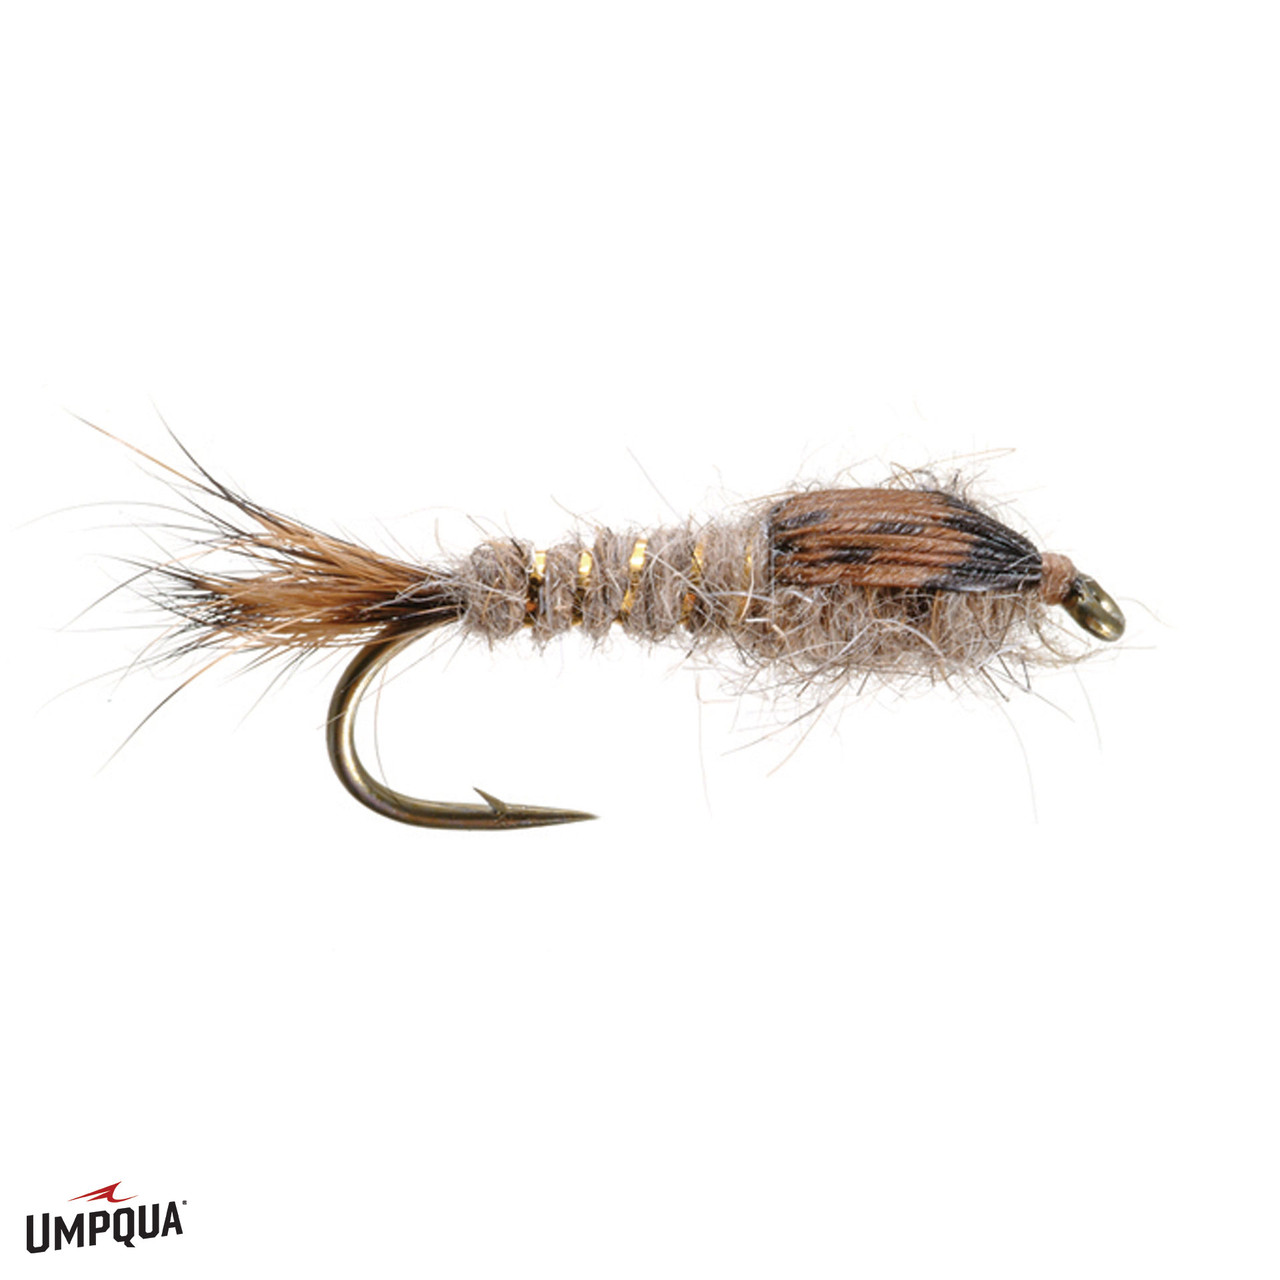 Bead Head Nymph Fly Fishing Flies - Gold Ribbed Hare's Ear Trout Fly - –  Wasatch Tenkara Rods